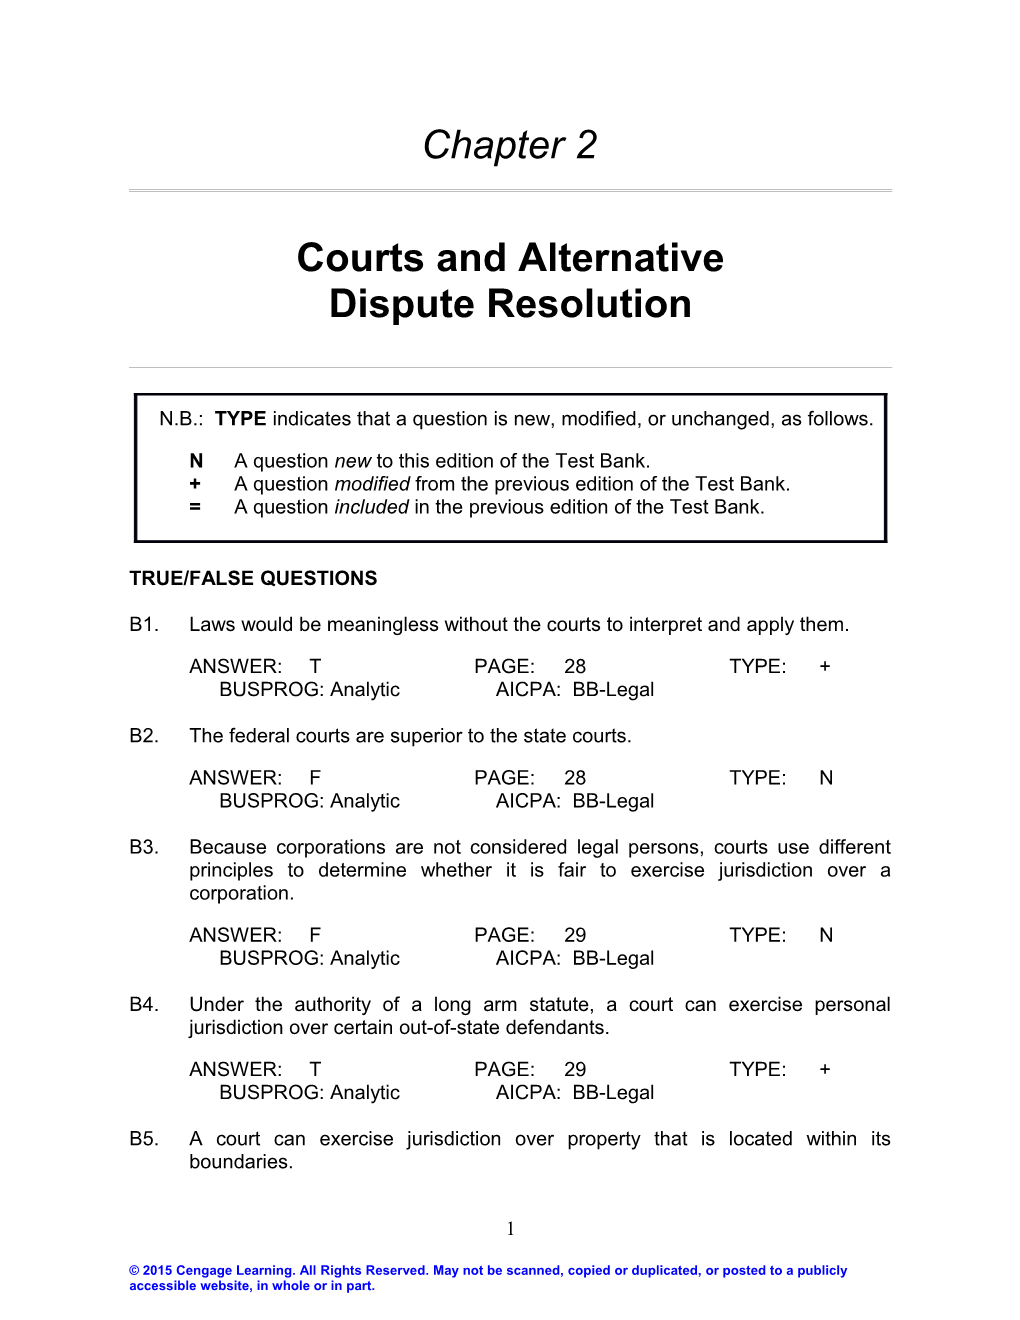 Chapter 2: Courts and Alternative Dispute Resolution 1